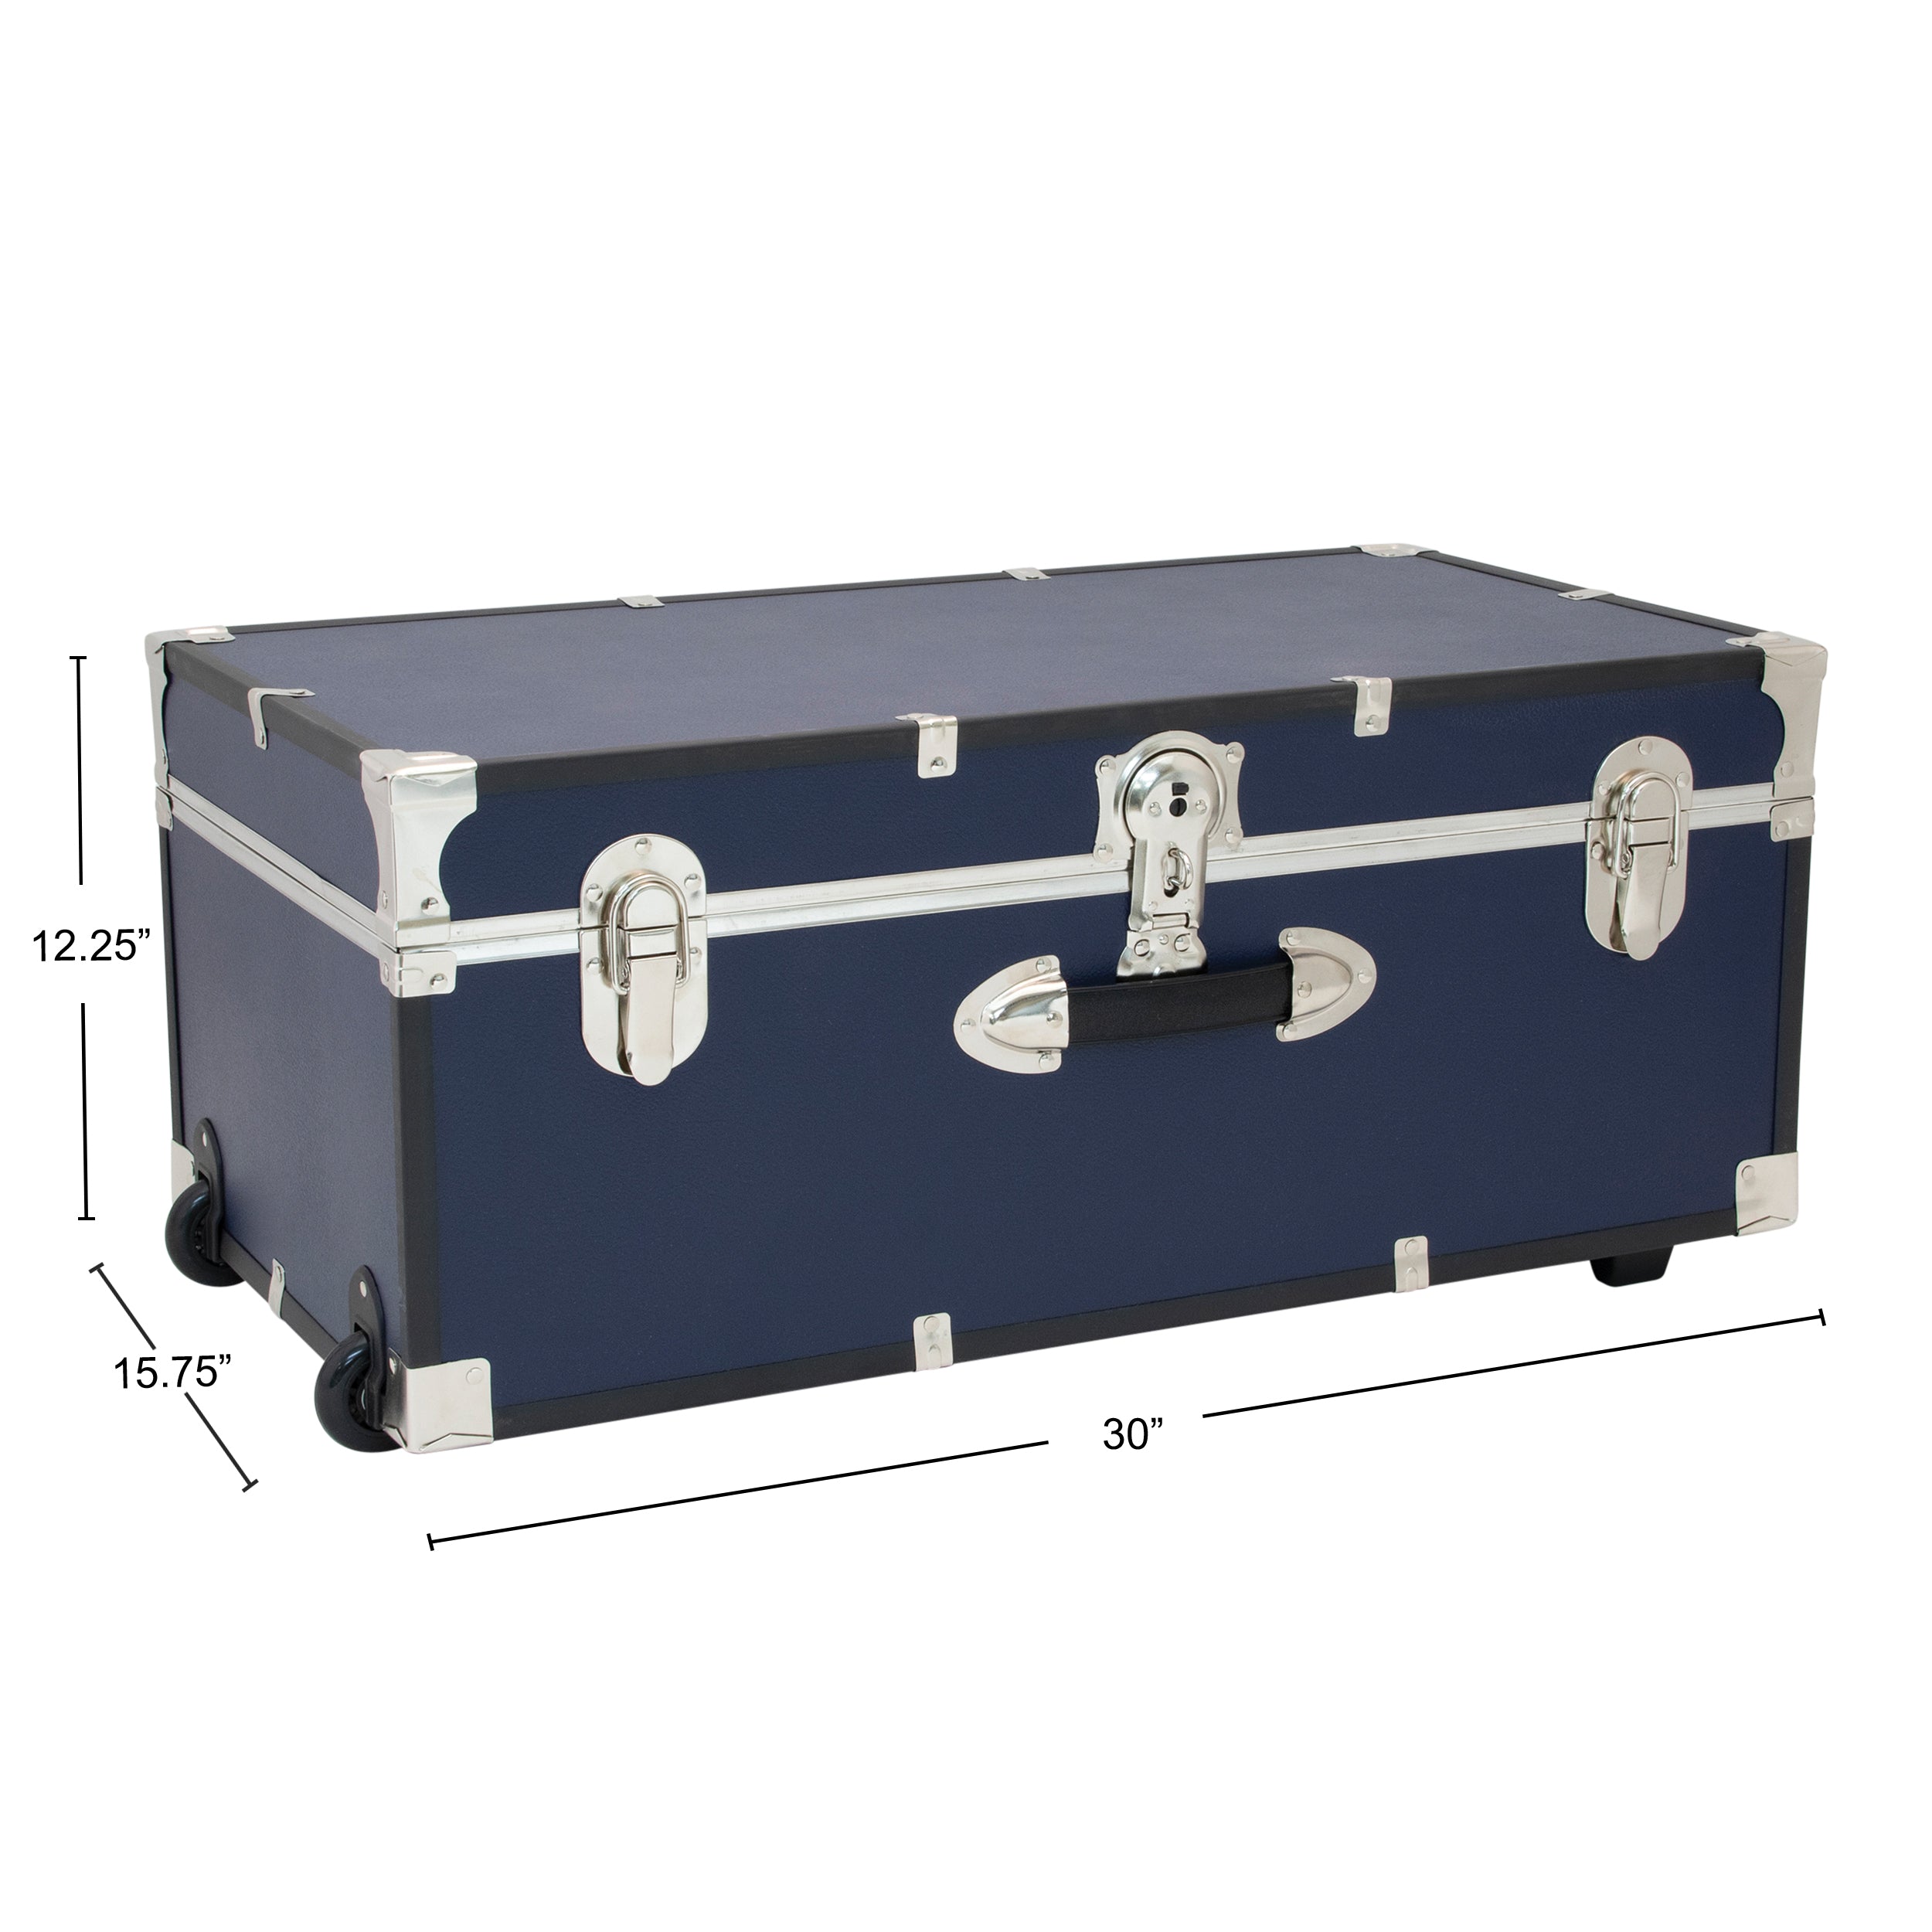 Dimensions, 12.25 inches high, 15.75 inches deep, 30 inches long - Seward Rover 30" Trunk with Wheels & Lock, Blue